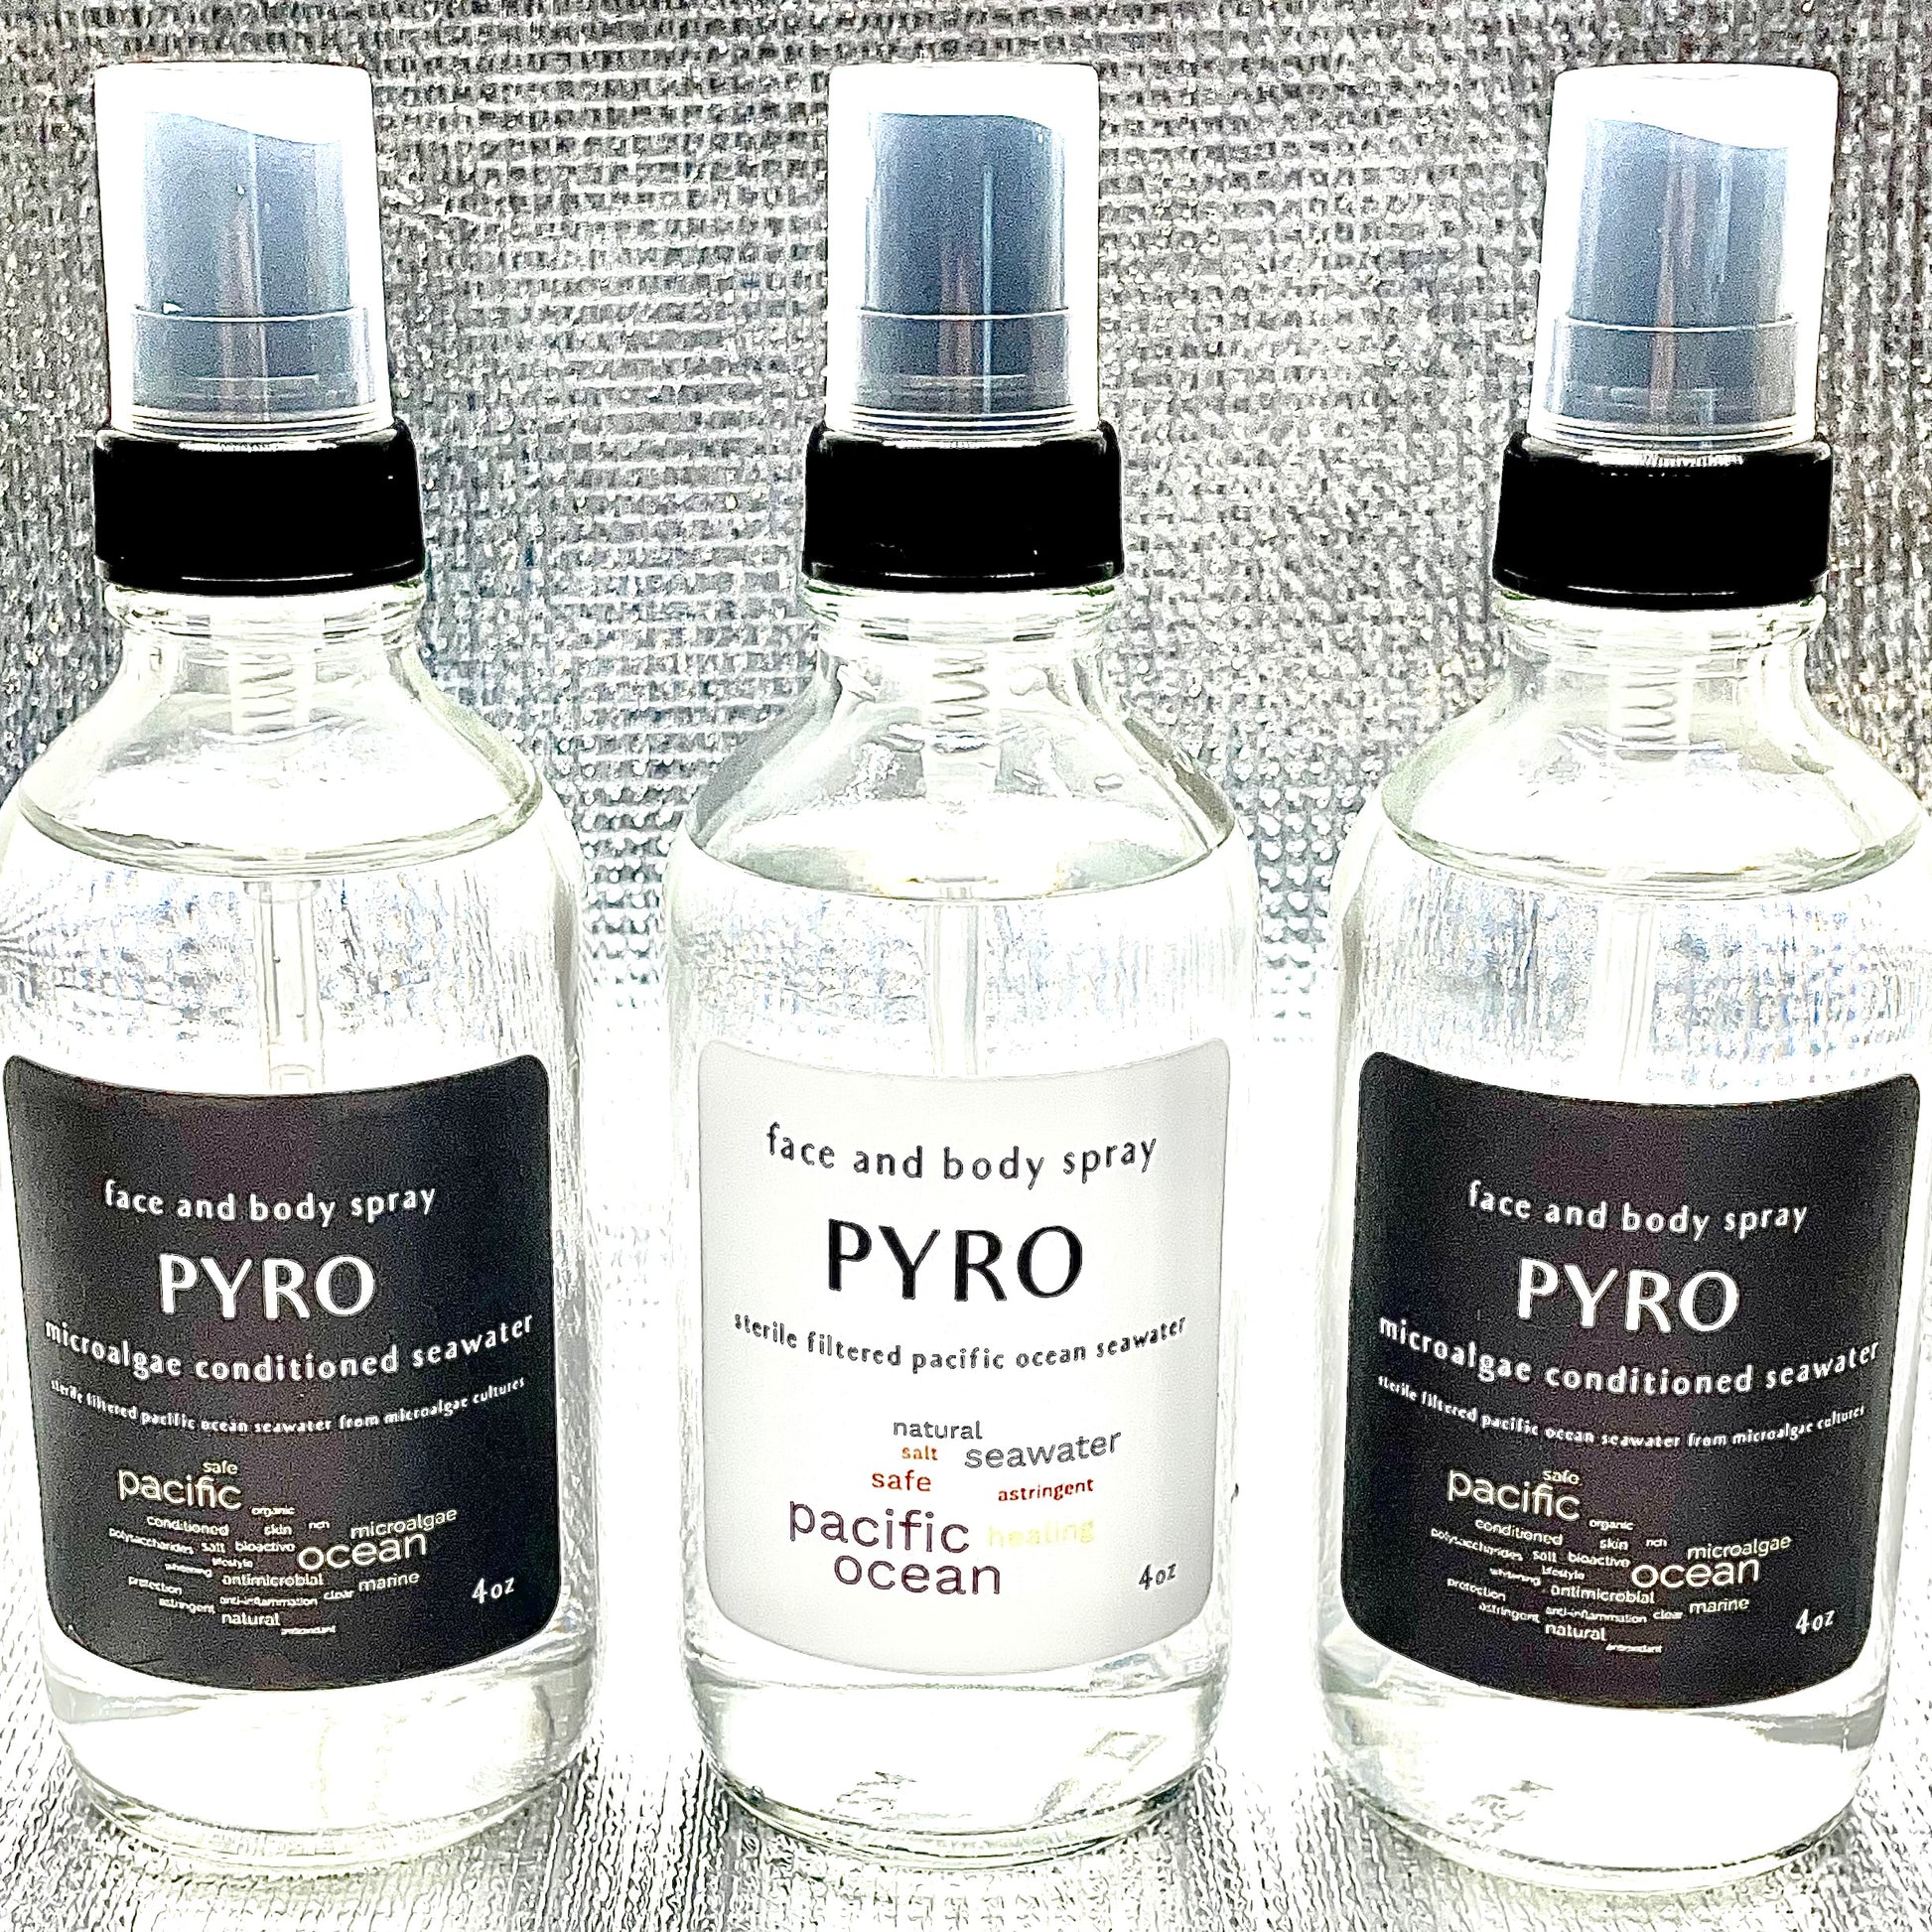 pure pacific ocean PYRO seawater natural organic clean safe and microalgae conditioned seawater